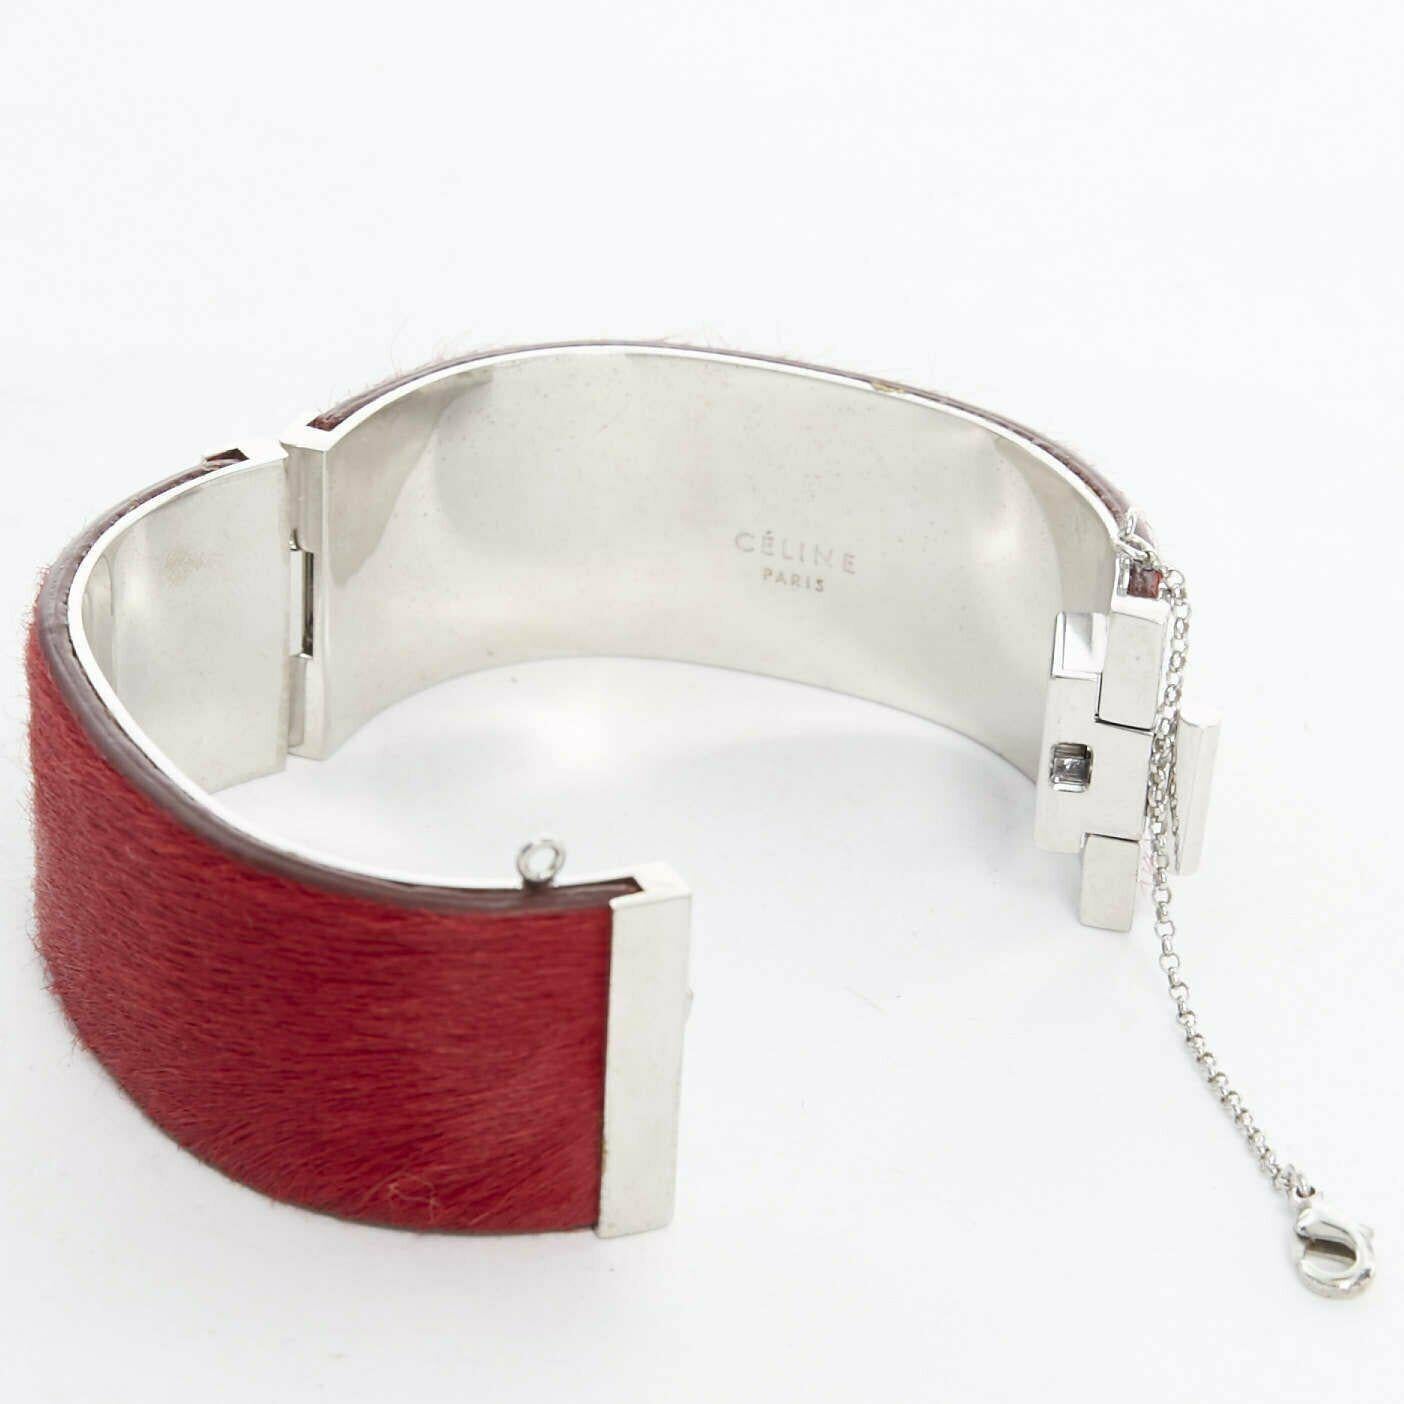 Women's CELINE PHOEBE PHILO red horse hair leather silver hardware chained bangle cuff S